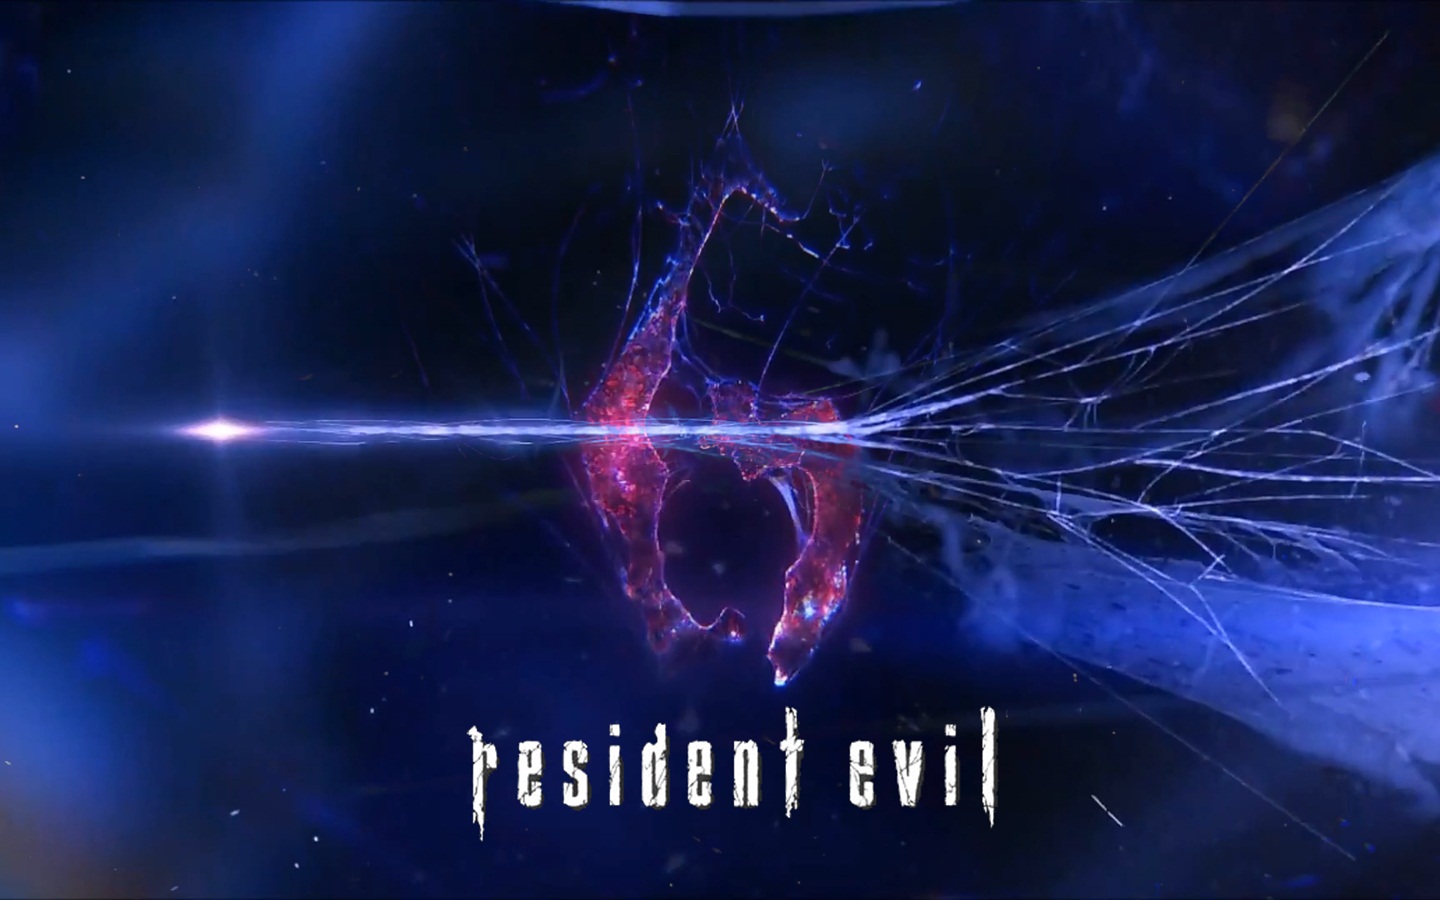 Resident Evil 6 HD game wallpapers #12 - 1440x900